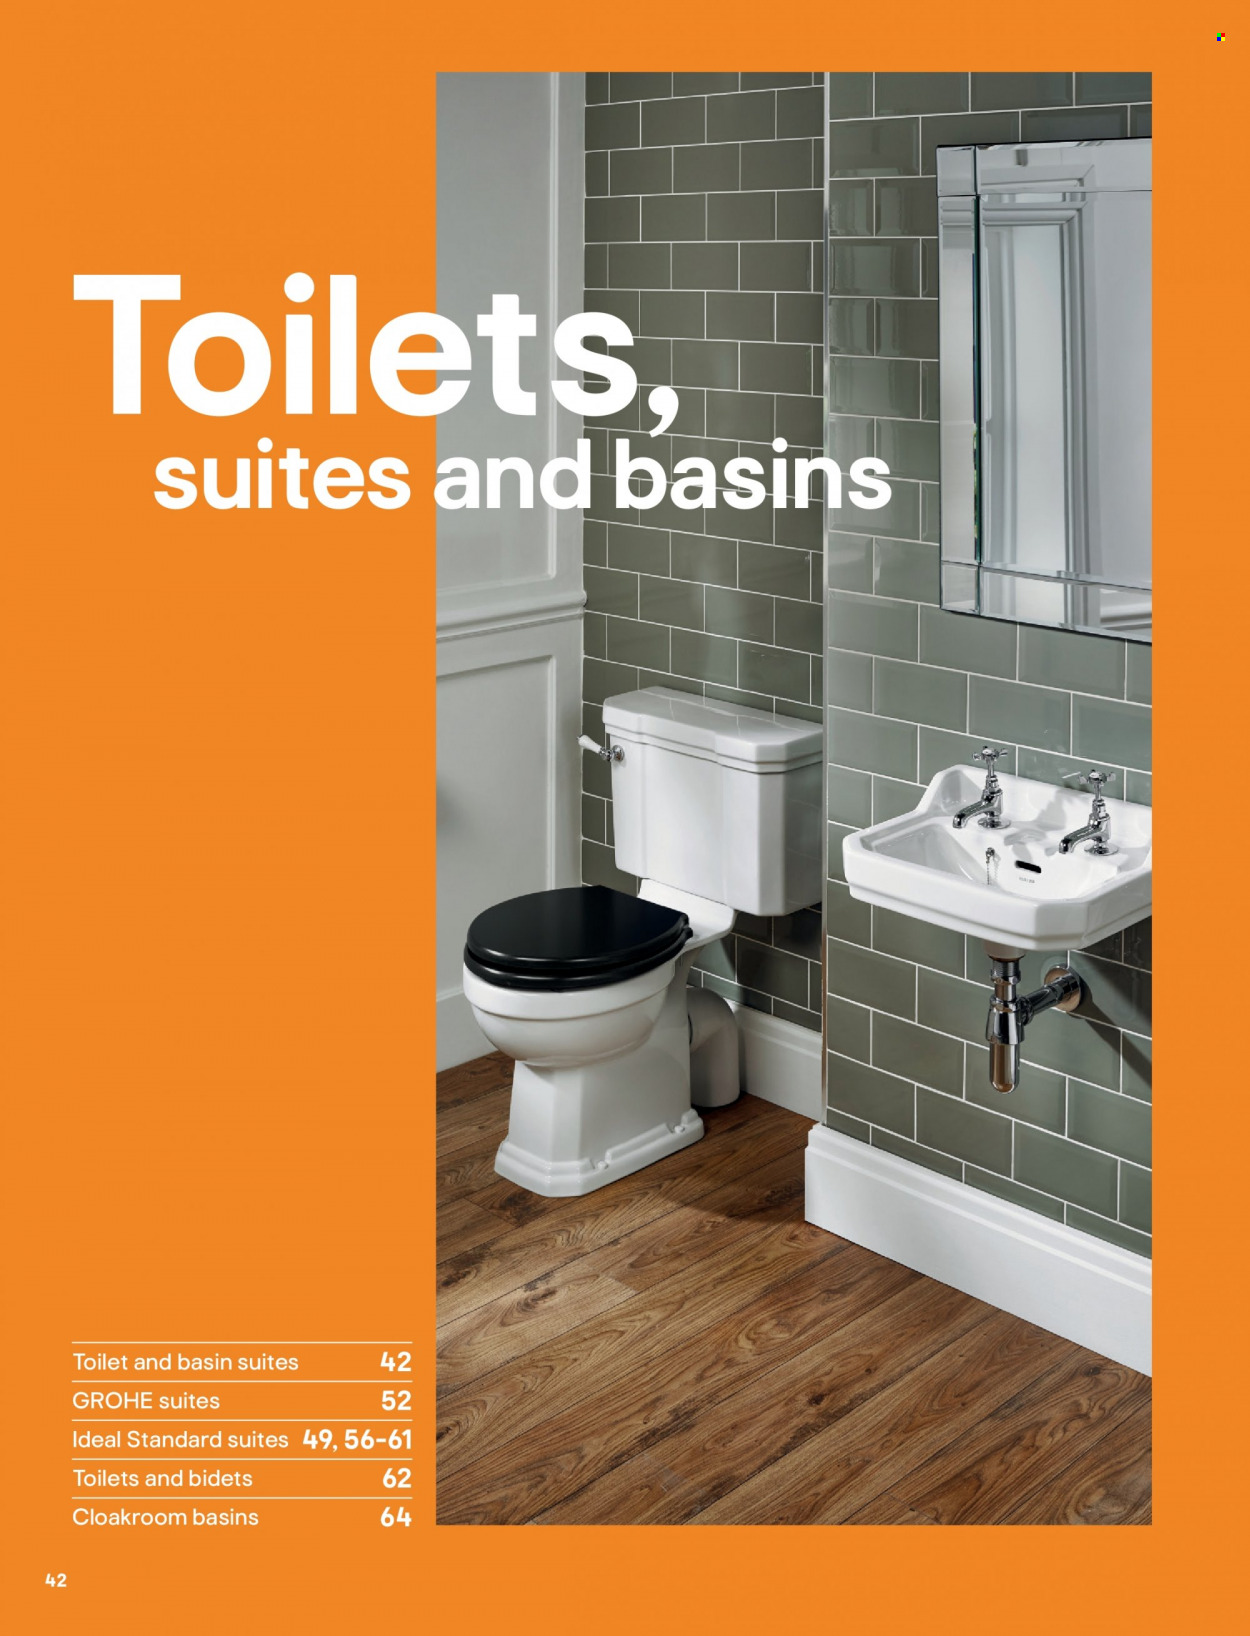 B&Q offer . Page 42.